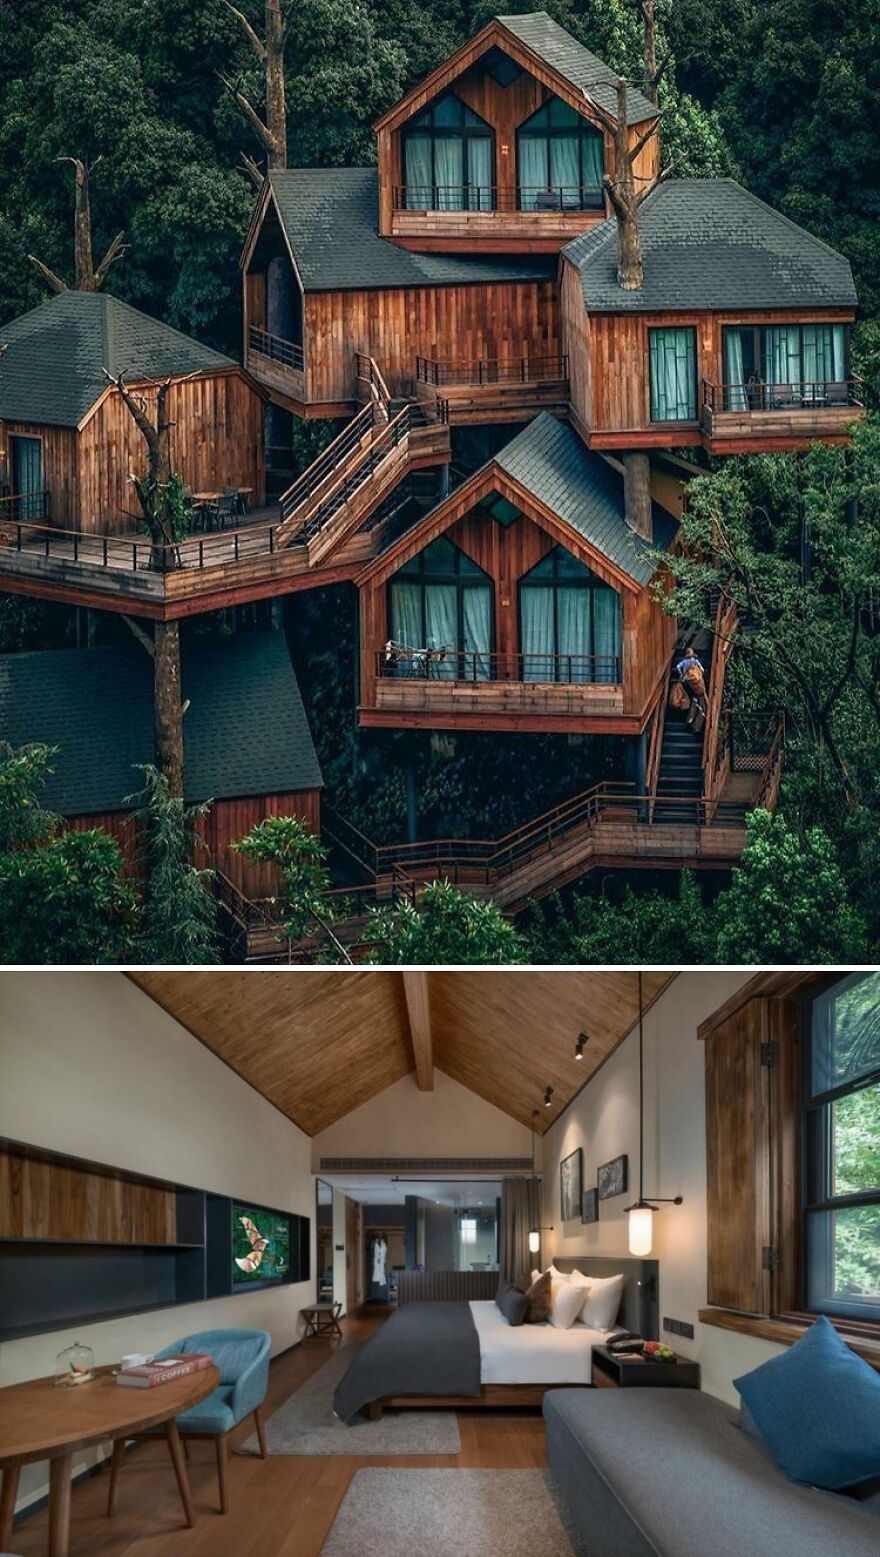 A Treehouse In Hangzhou, China